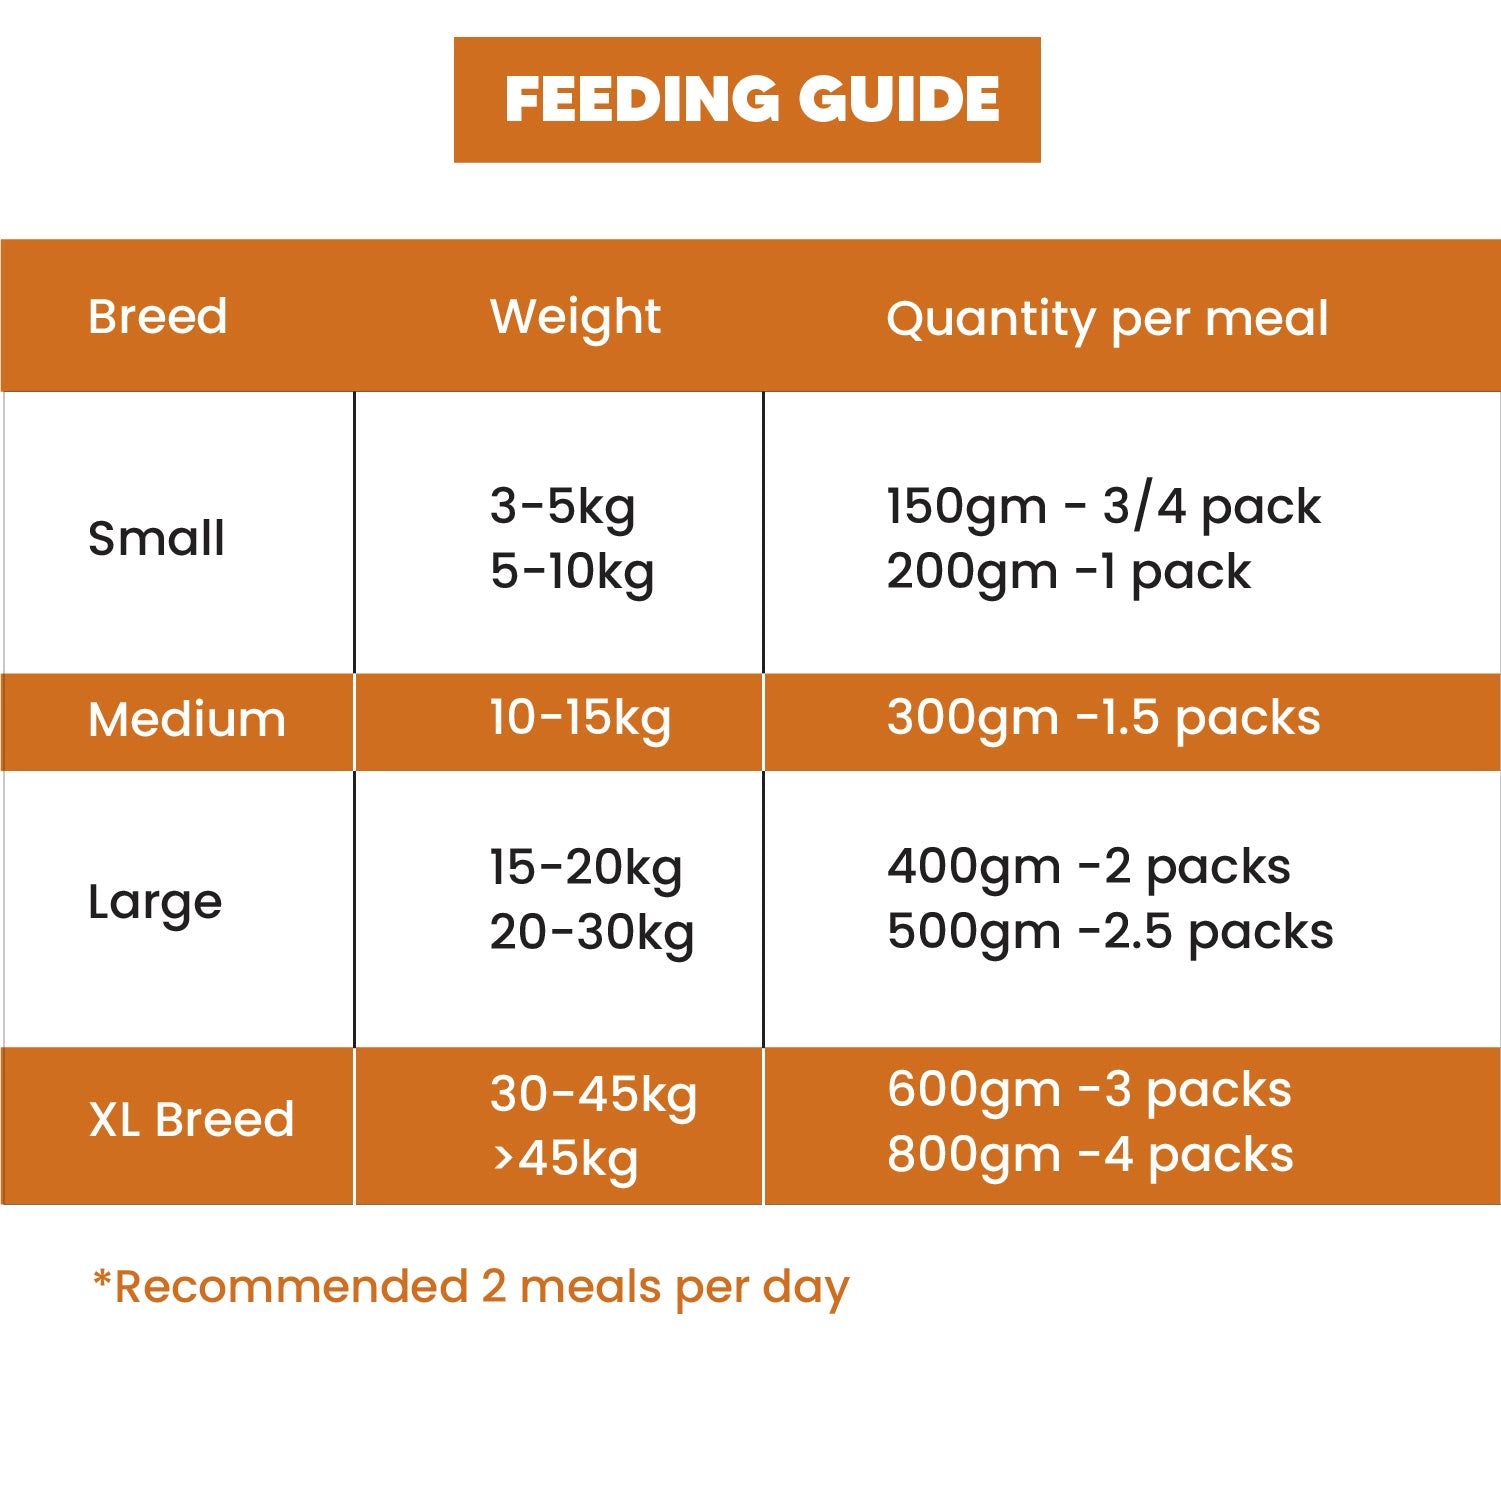 Chicken feeding guide for dogs and puppies